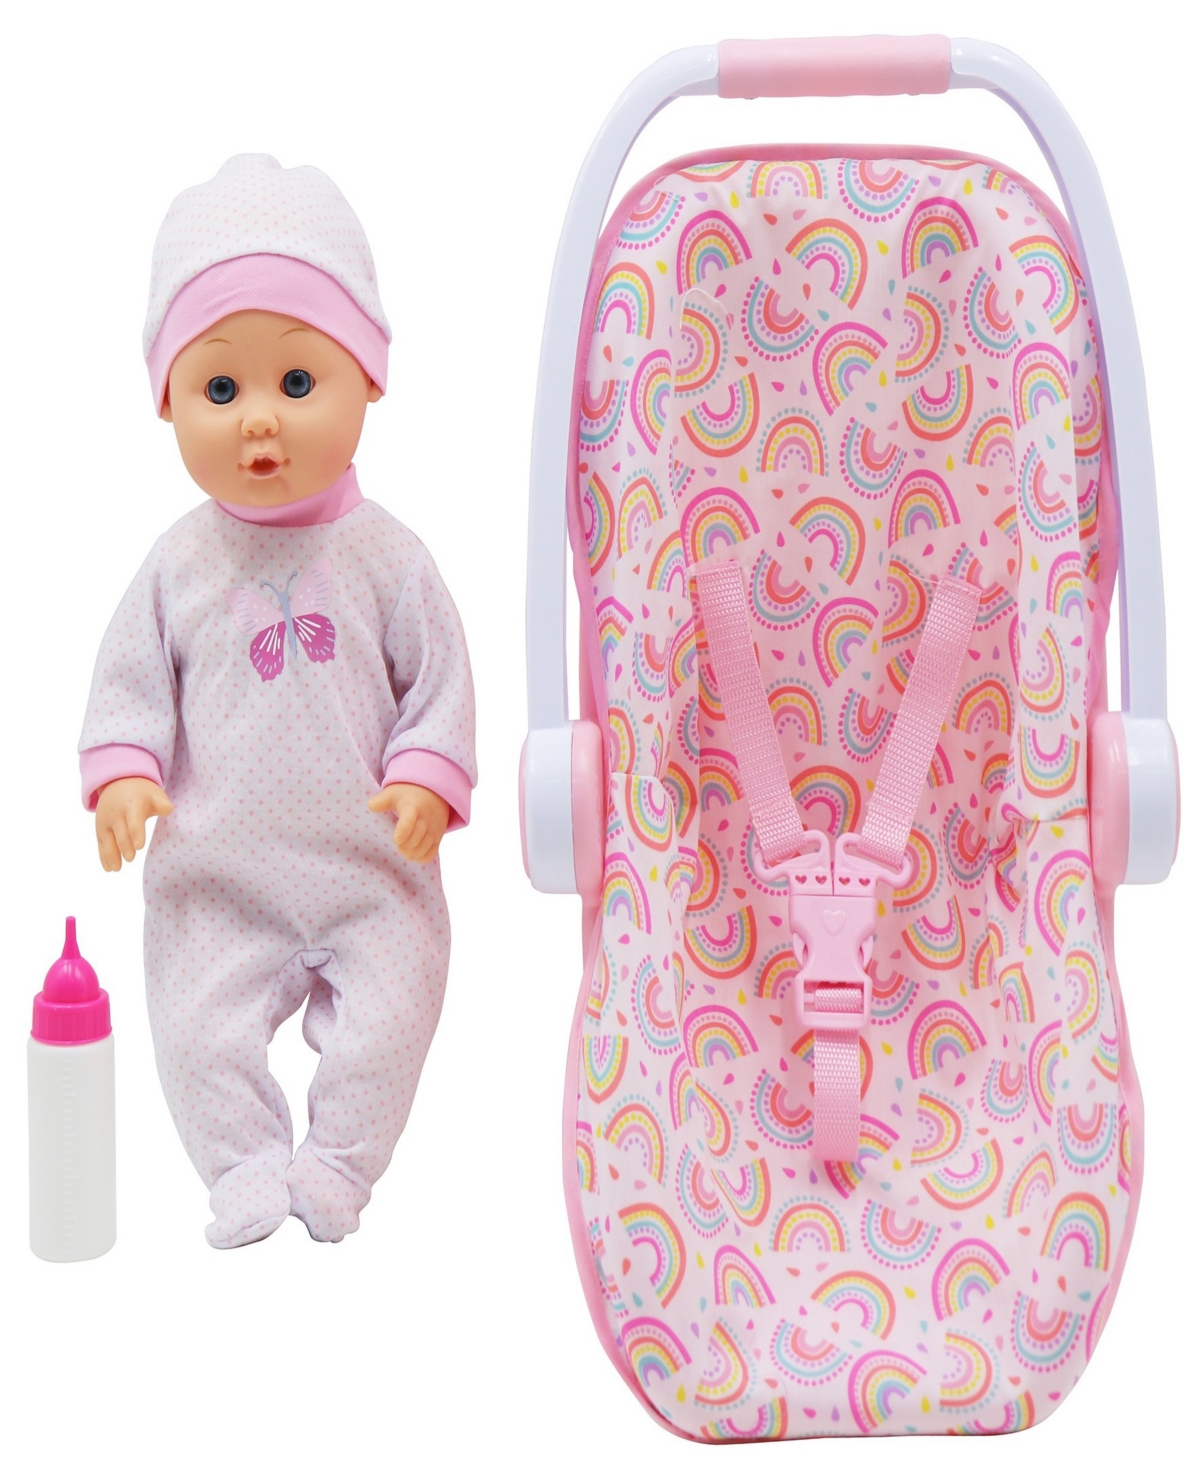 Dream Collection Baby Doll With Toy Carrier Car Seat Gi-go Dolls Kids 3 Piece Playset In Multi